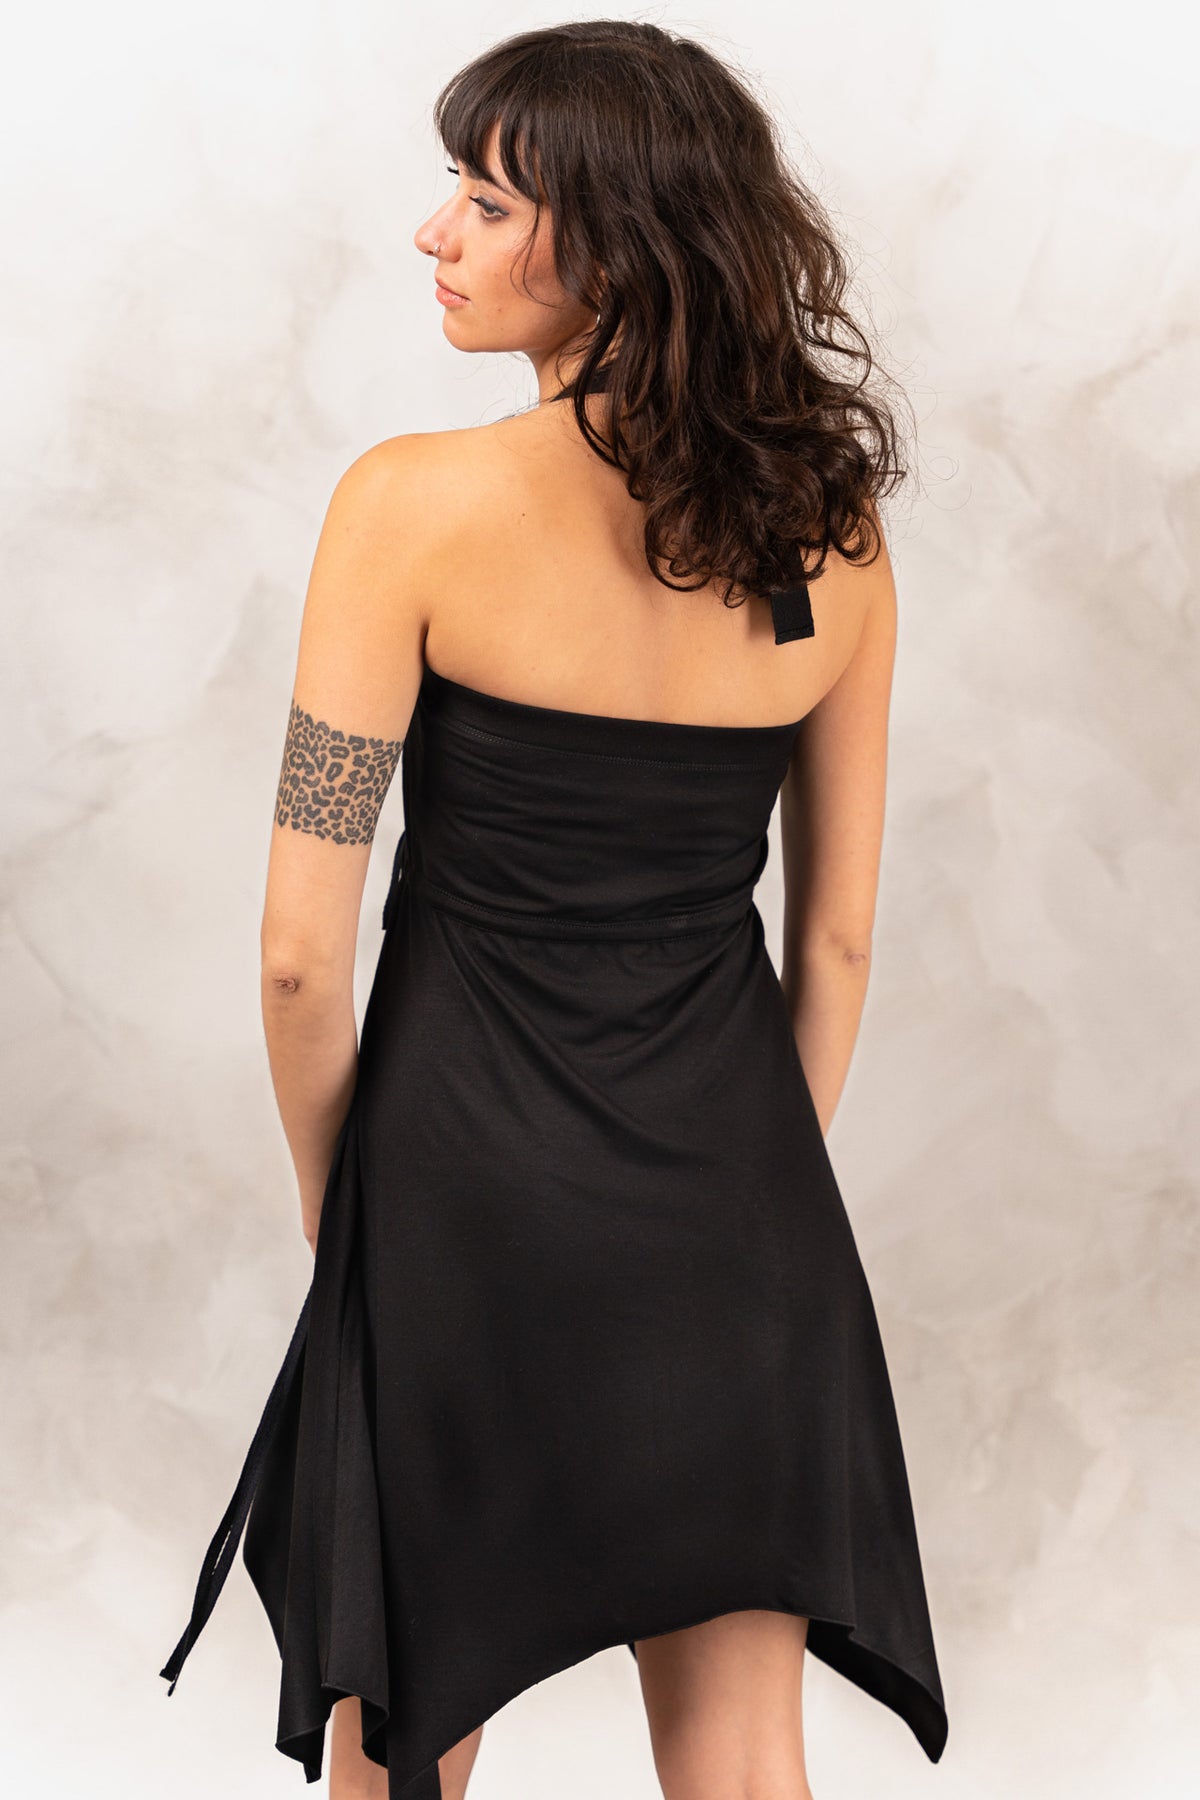 a woman in a black dress with a tattoo on her arm